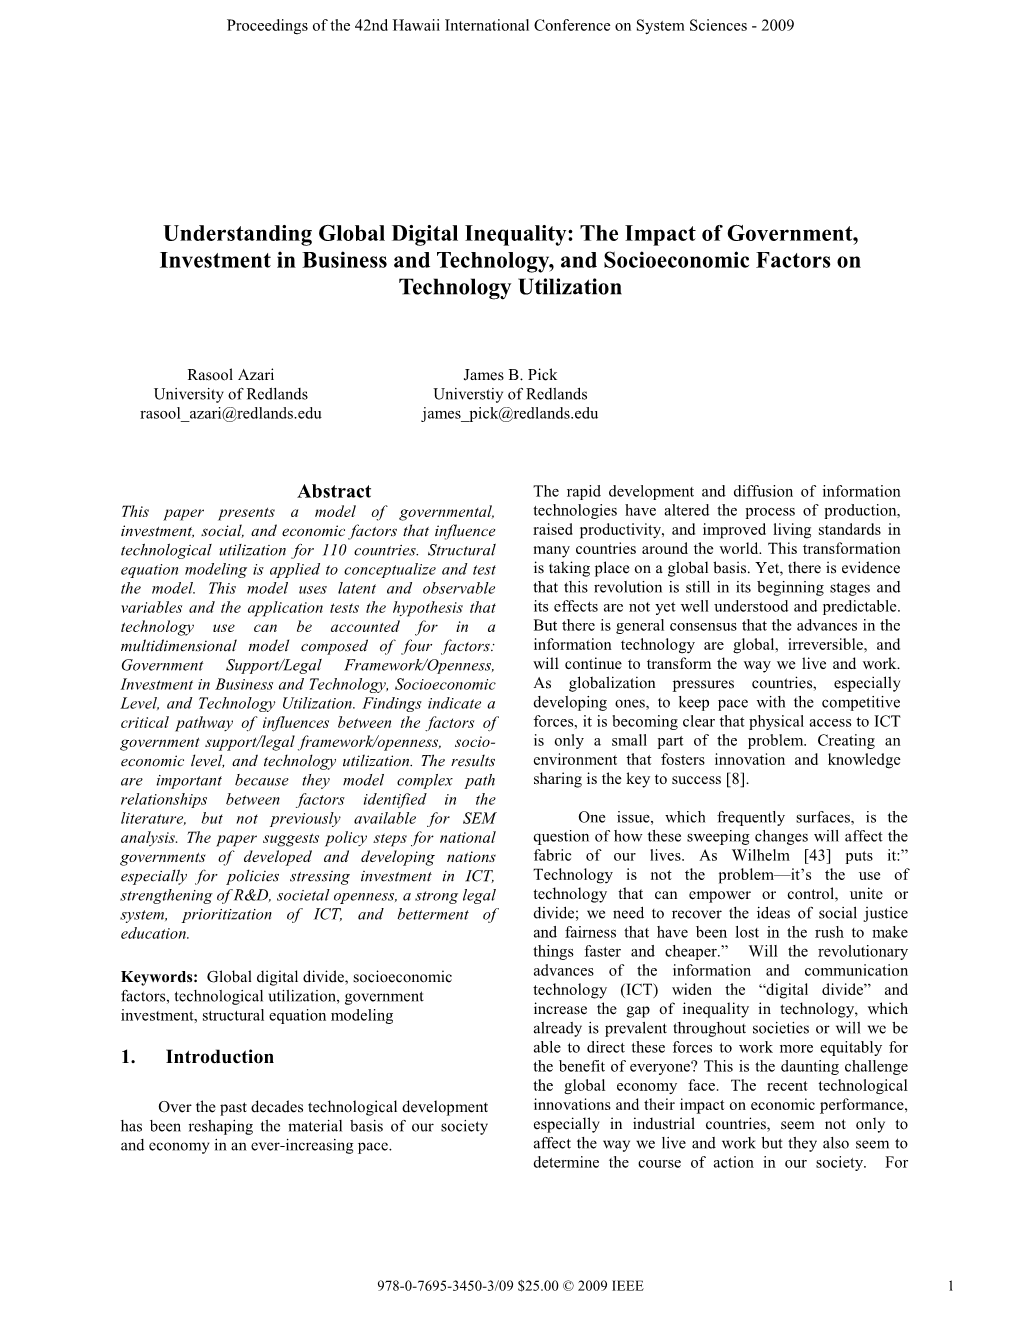 Understanding Global Digital Inequality: the Impact of Government, Investment in Business and Technology, and Socioeconomic Factors on Technology Utilization